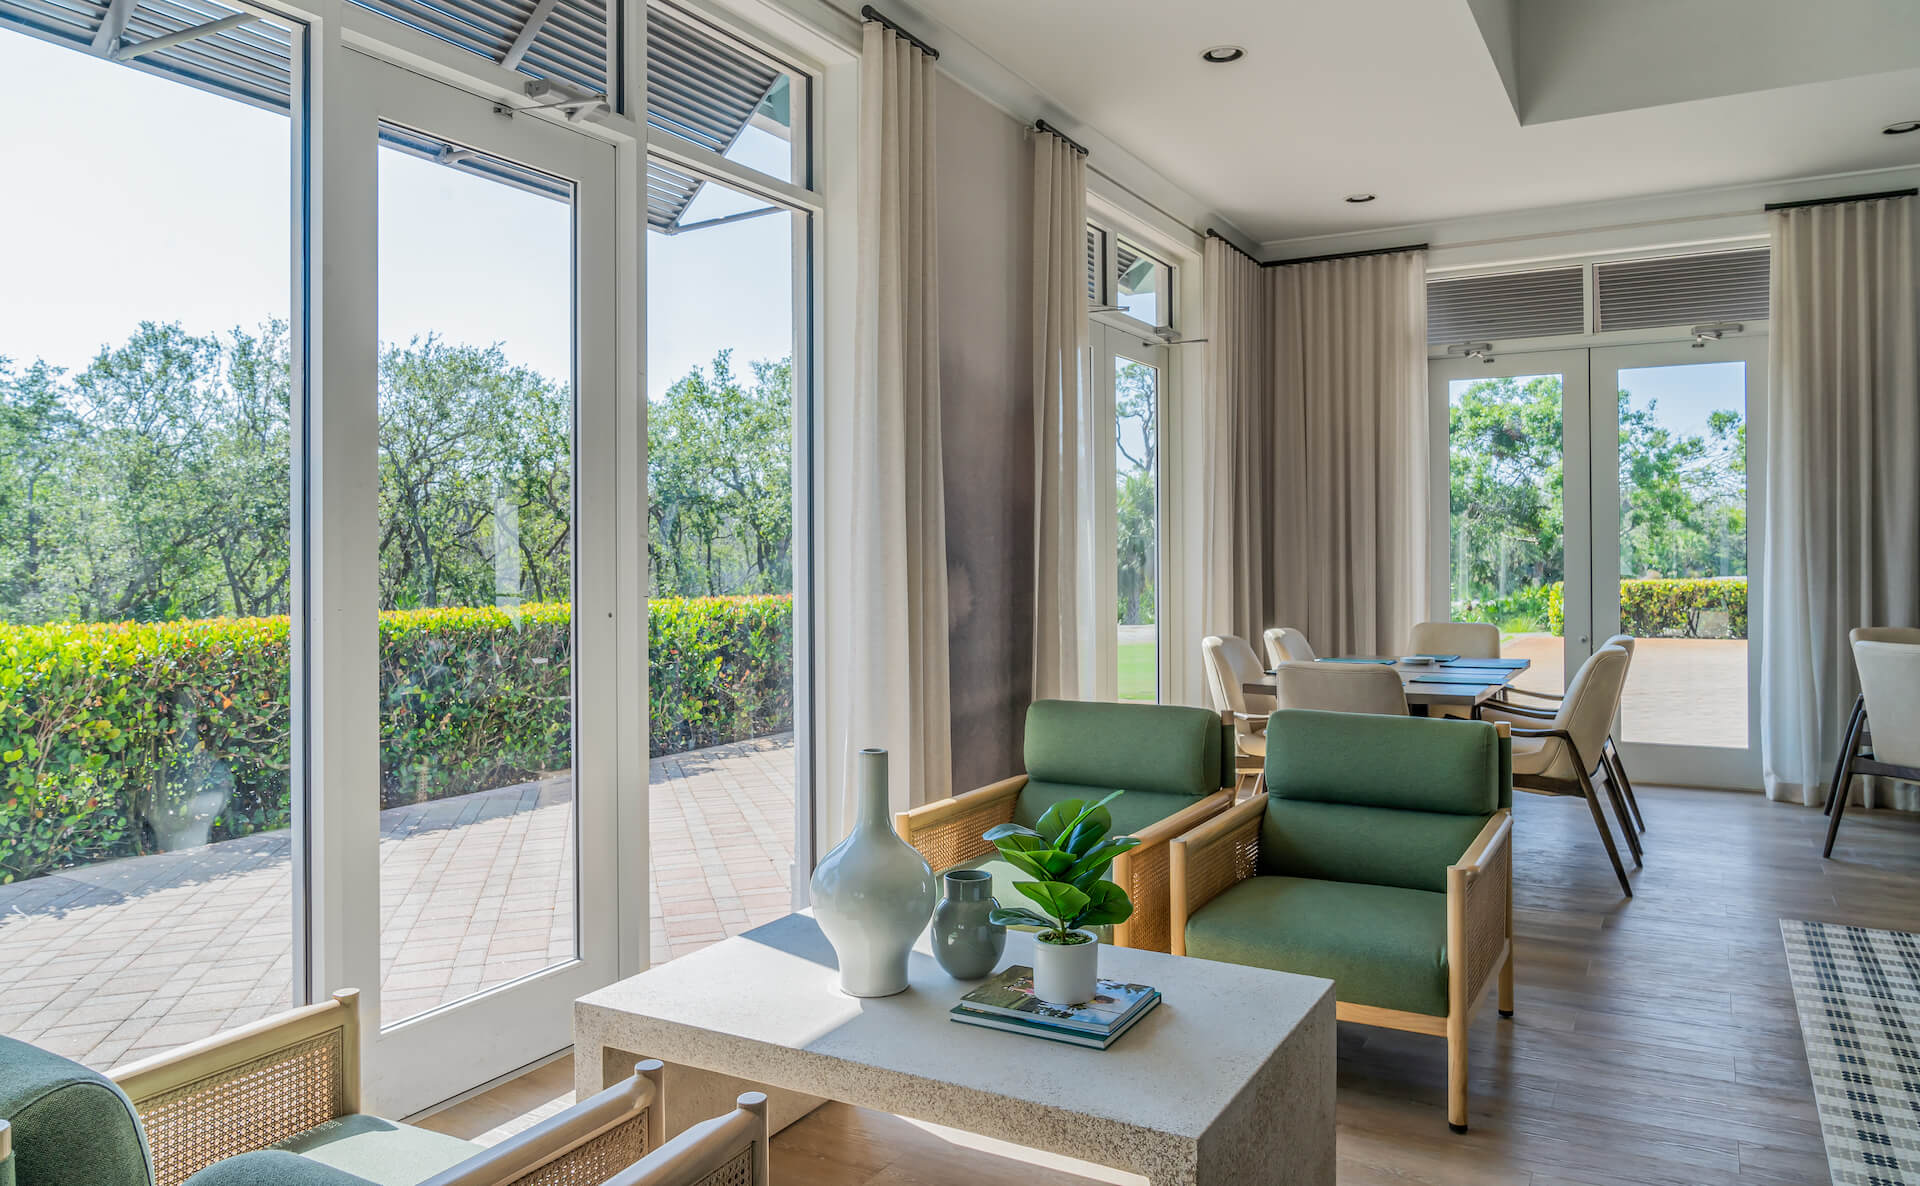 Seating area near big windows overlooking greenery in the clubhouse at Saltleaf Golf Preserve